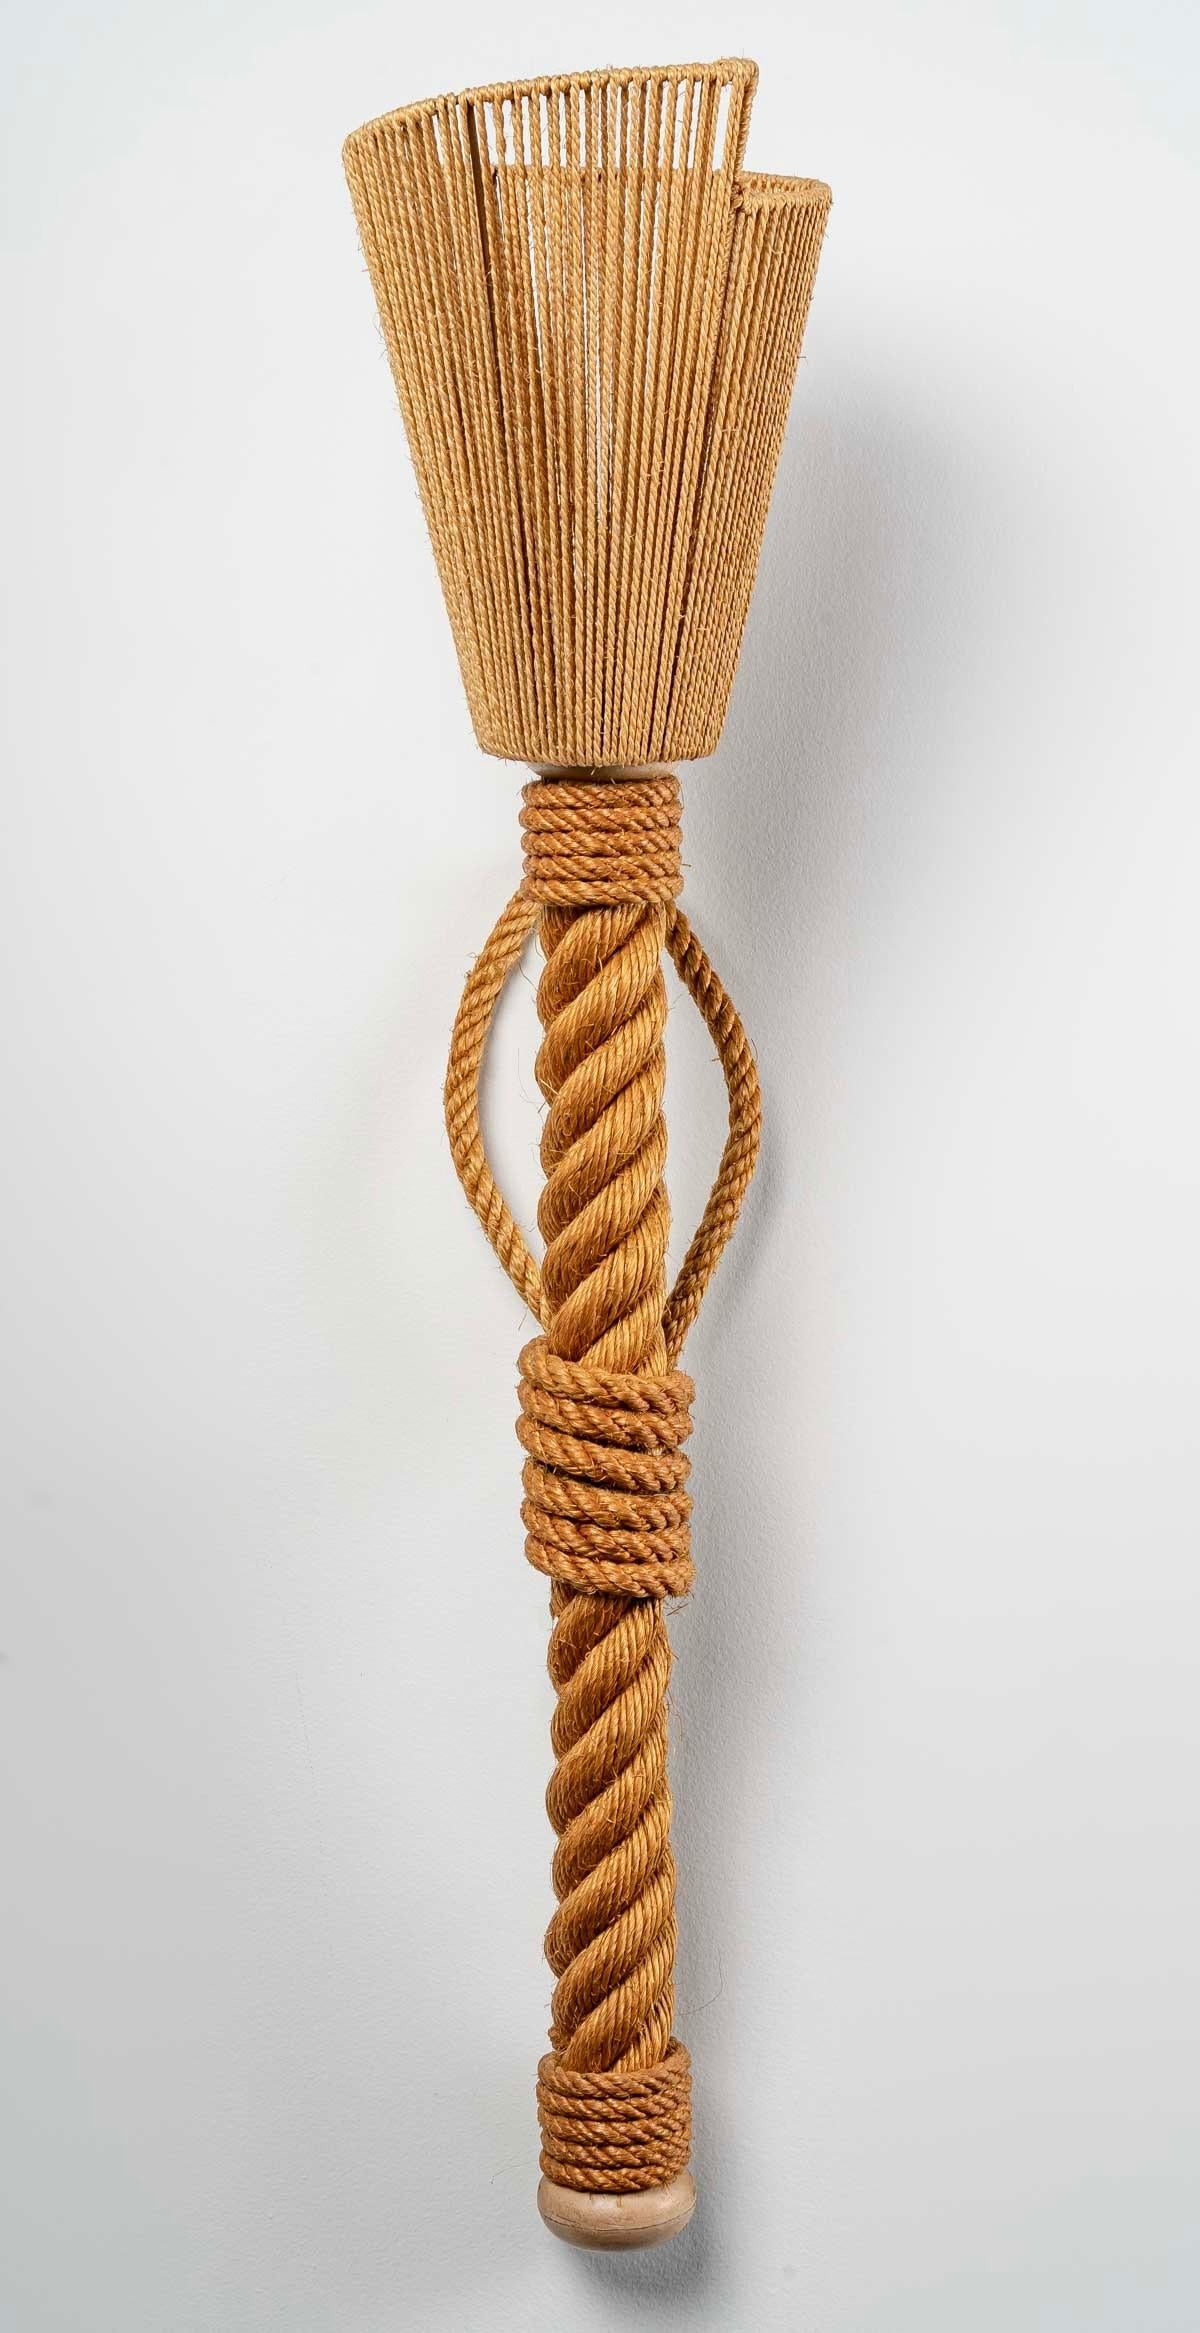 Composed of a large rope arm decorated in the center with a rope wrapped around the arm and forming a loop in the back serving as a wall support.
Two other ropes wrapped around the arm, placed at the top and bottom of the sconce, complete the